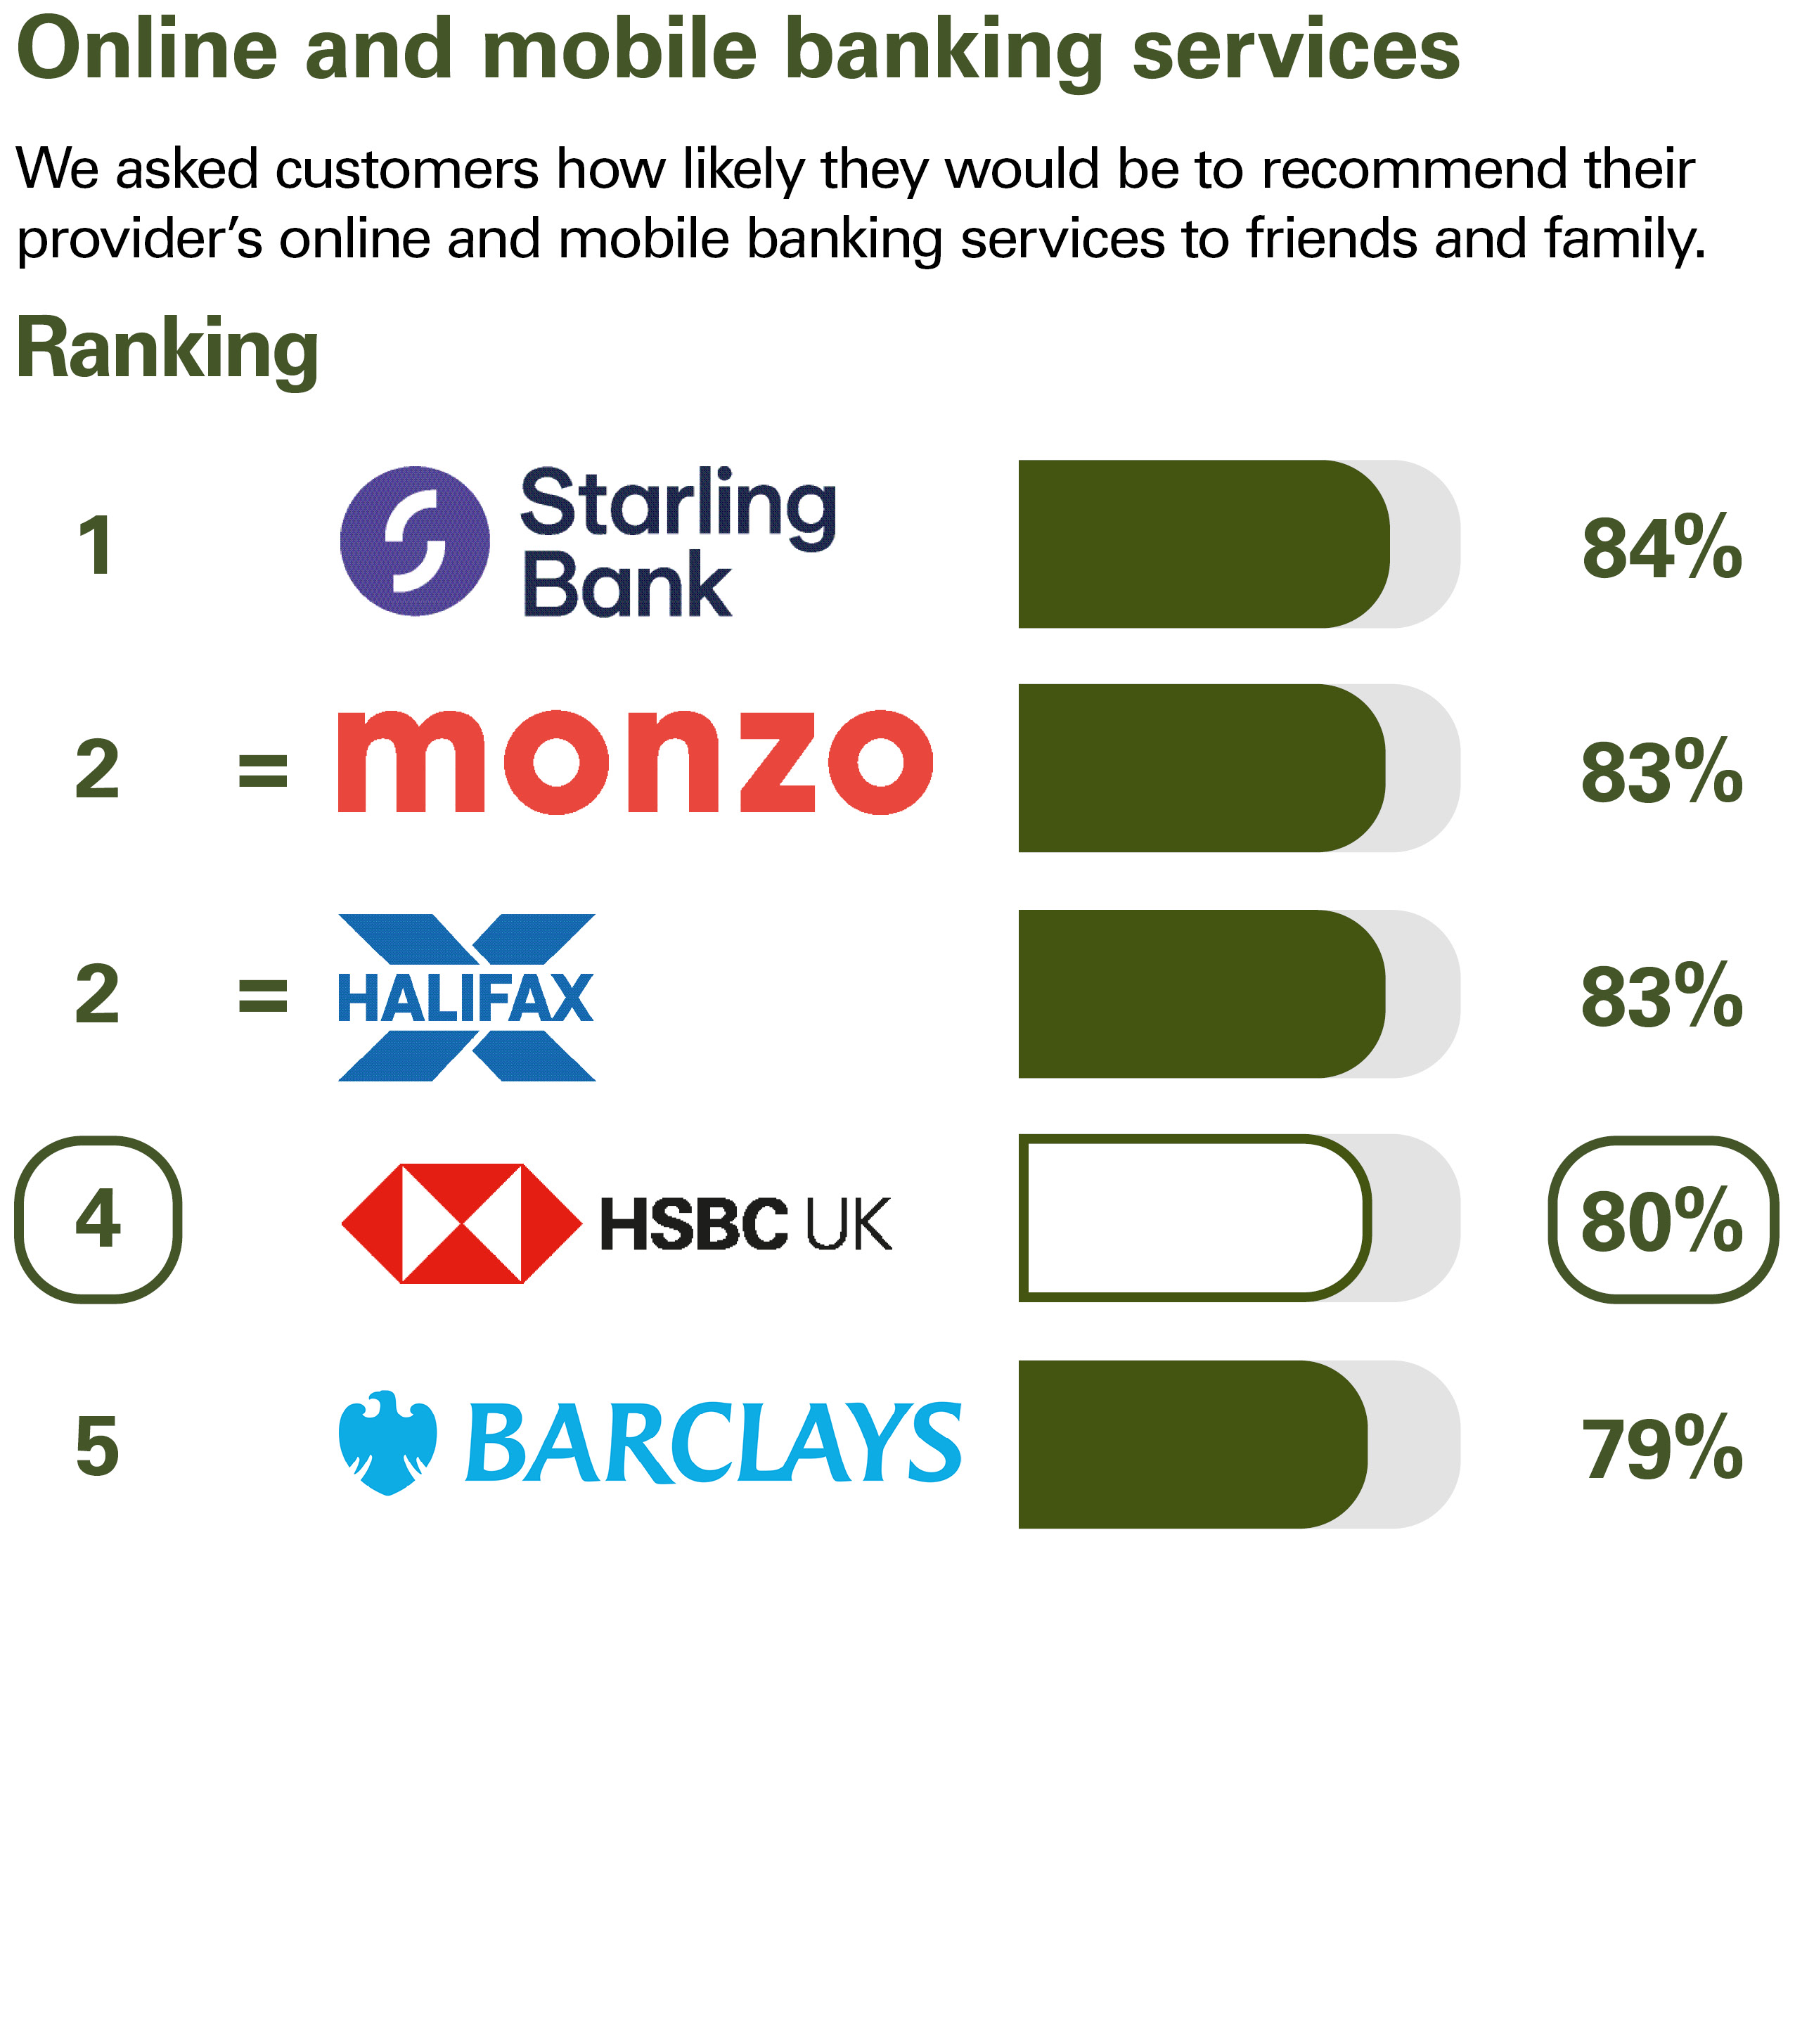 Online and mobile banking services. We asked customers how likely they would be to recommend their provider’s online and mobile banking services to friends and family. Ranking: 1 Starling Bank 84% equal 2 Monzo 83% equal 2 Halifax 83% 4 HSBC UK 80% 5 Barclays 79%